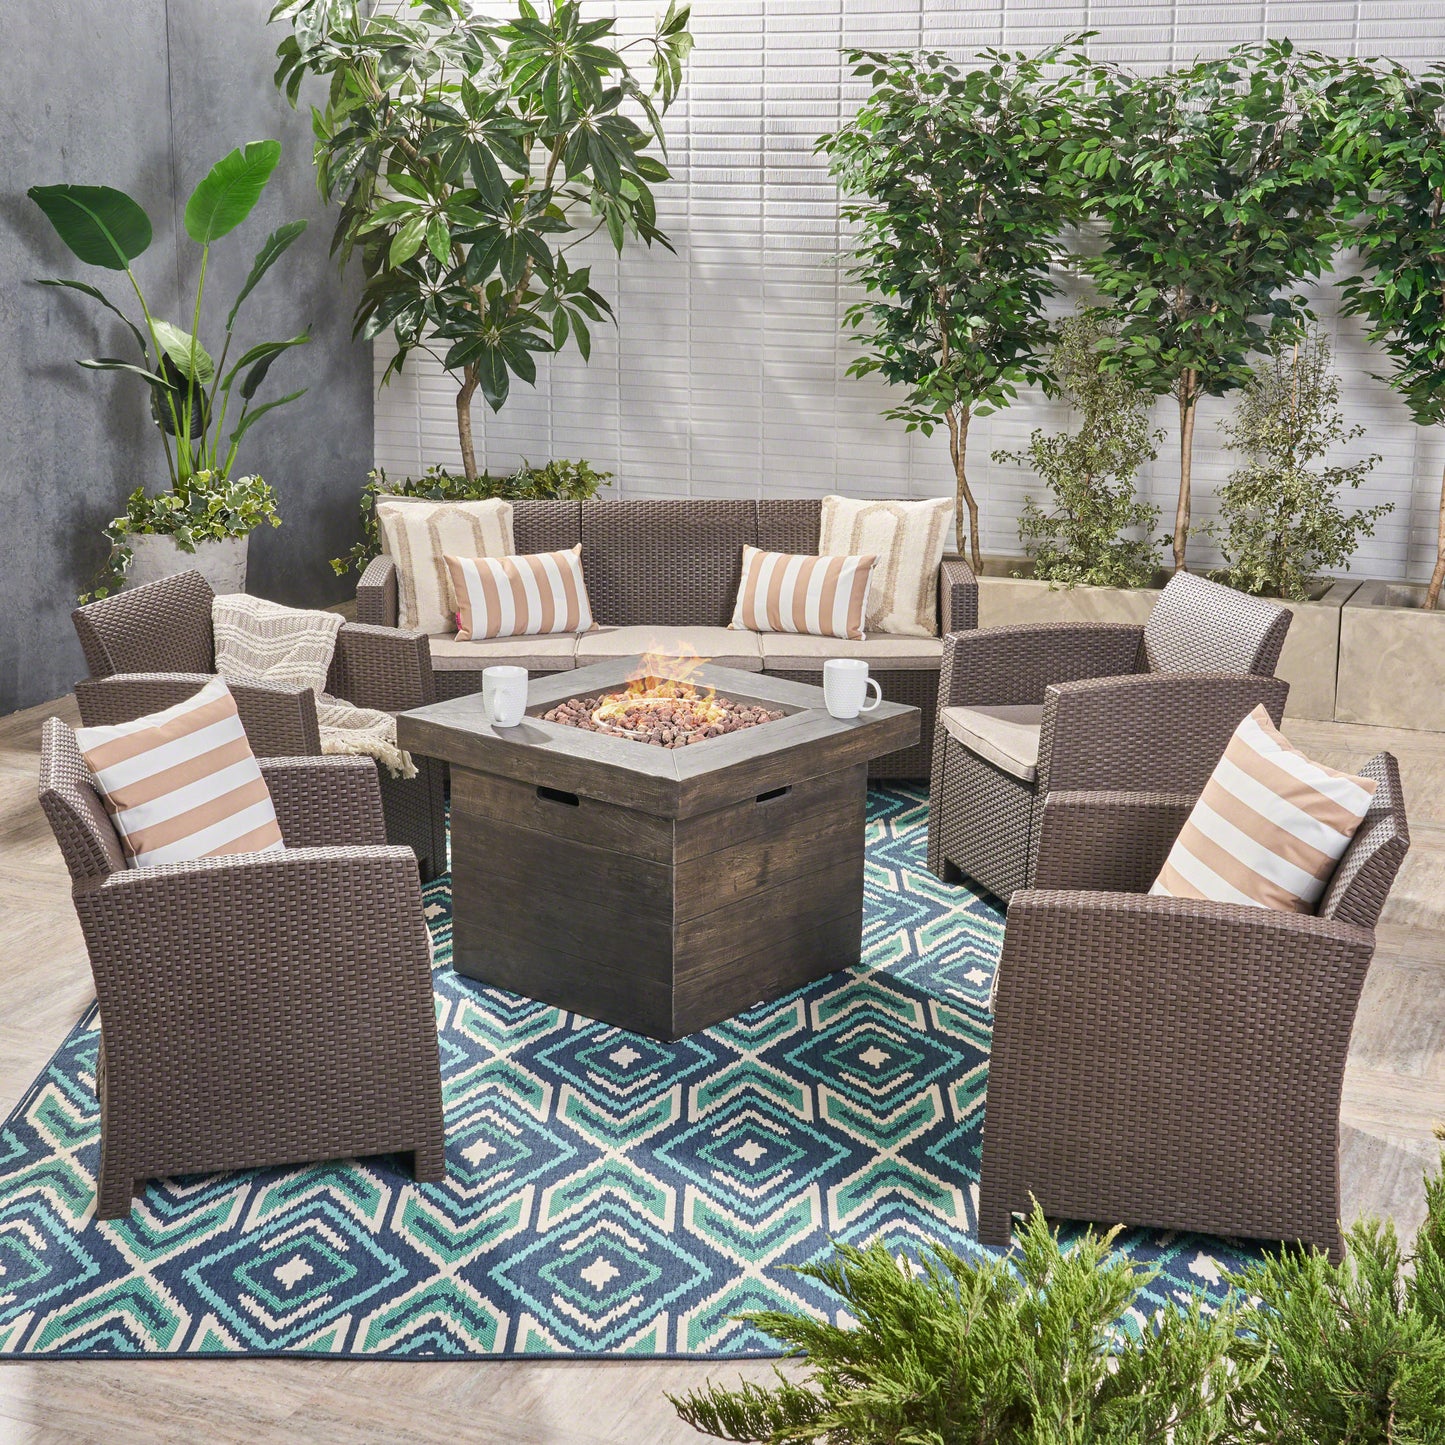 Peter Outdoor 7-Seater Chat Set with Fire Pit